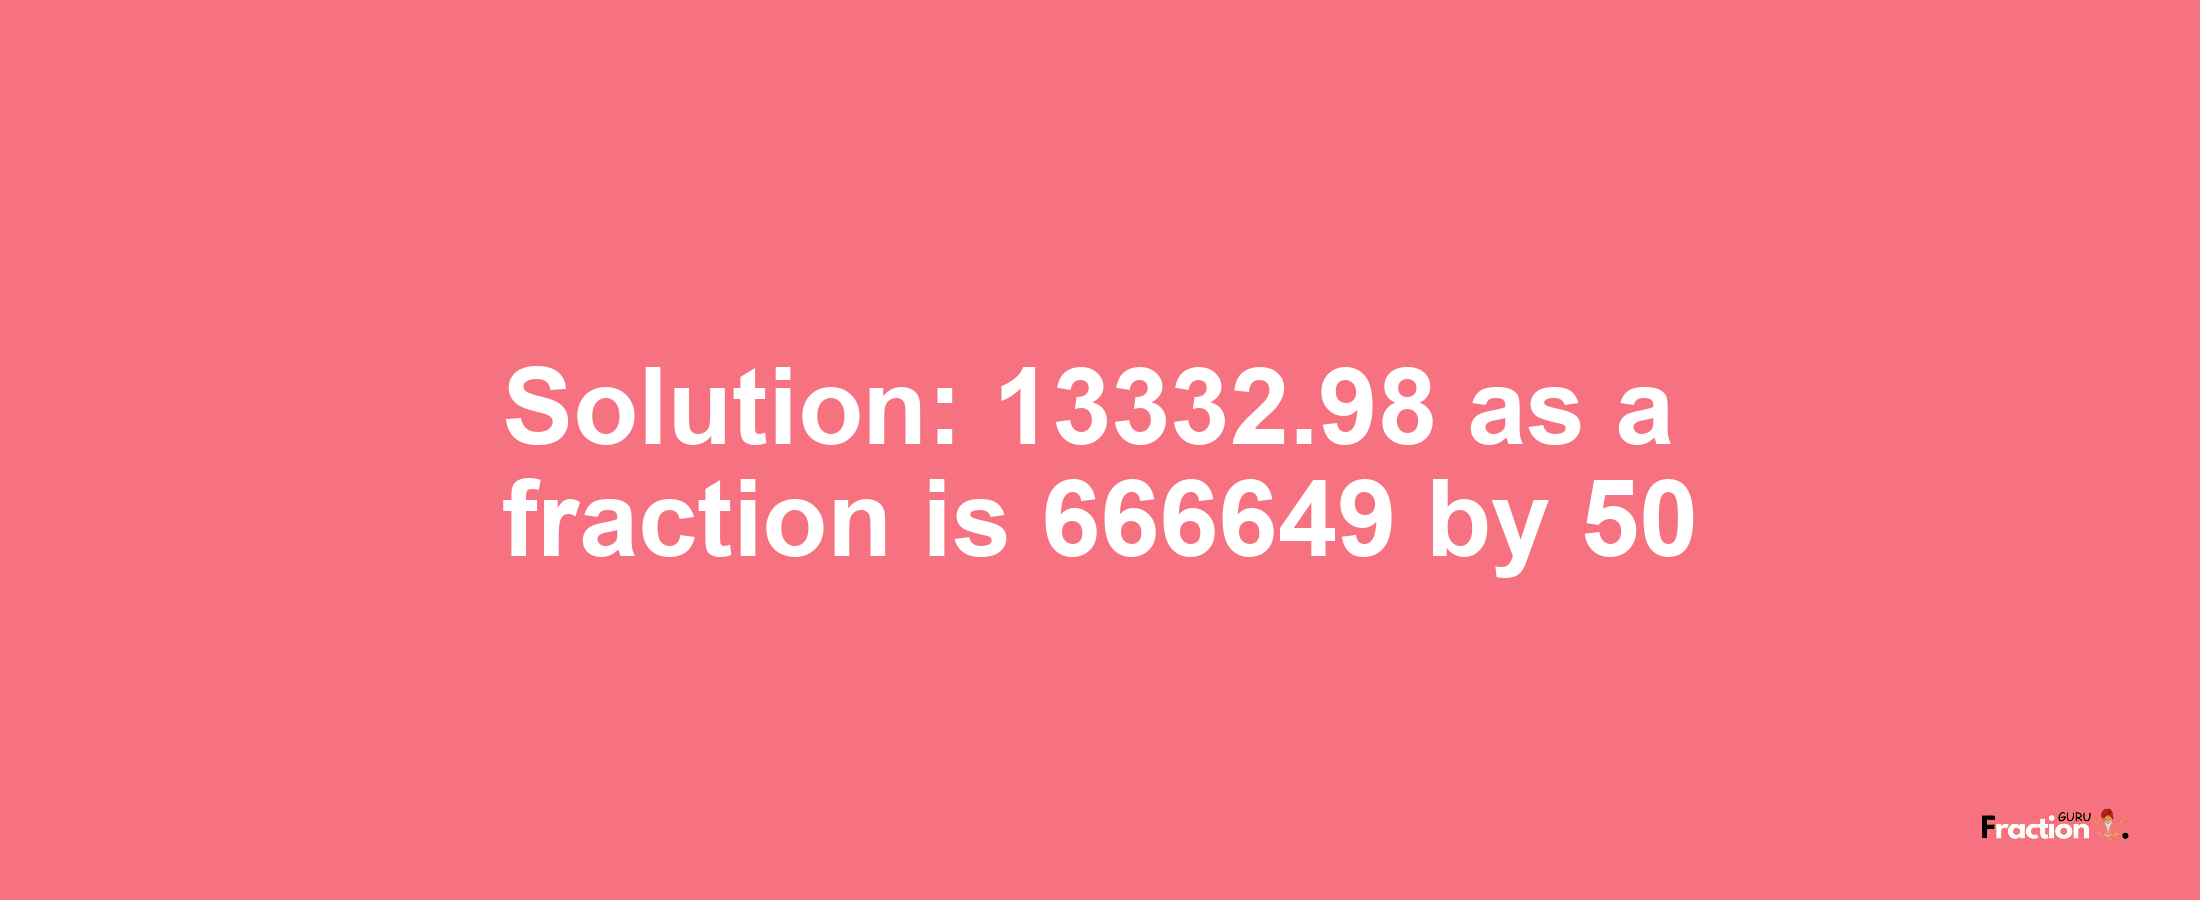 Solution:13332.98 as a fraction is 666649/50